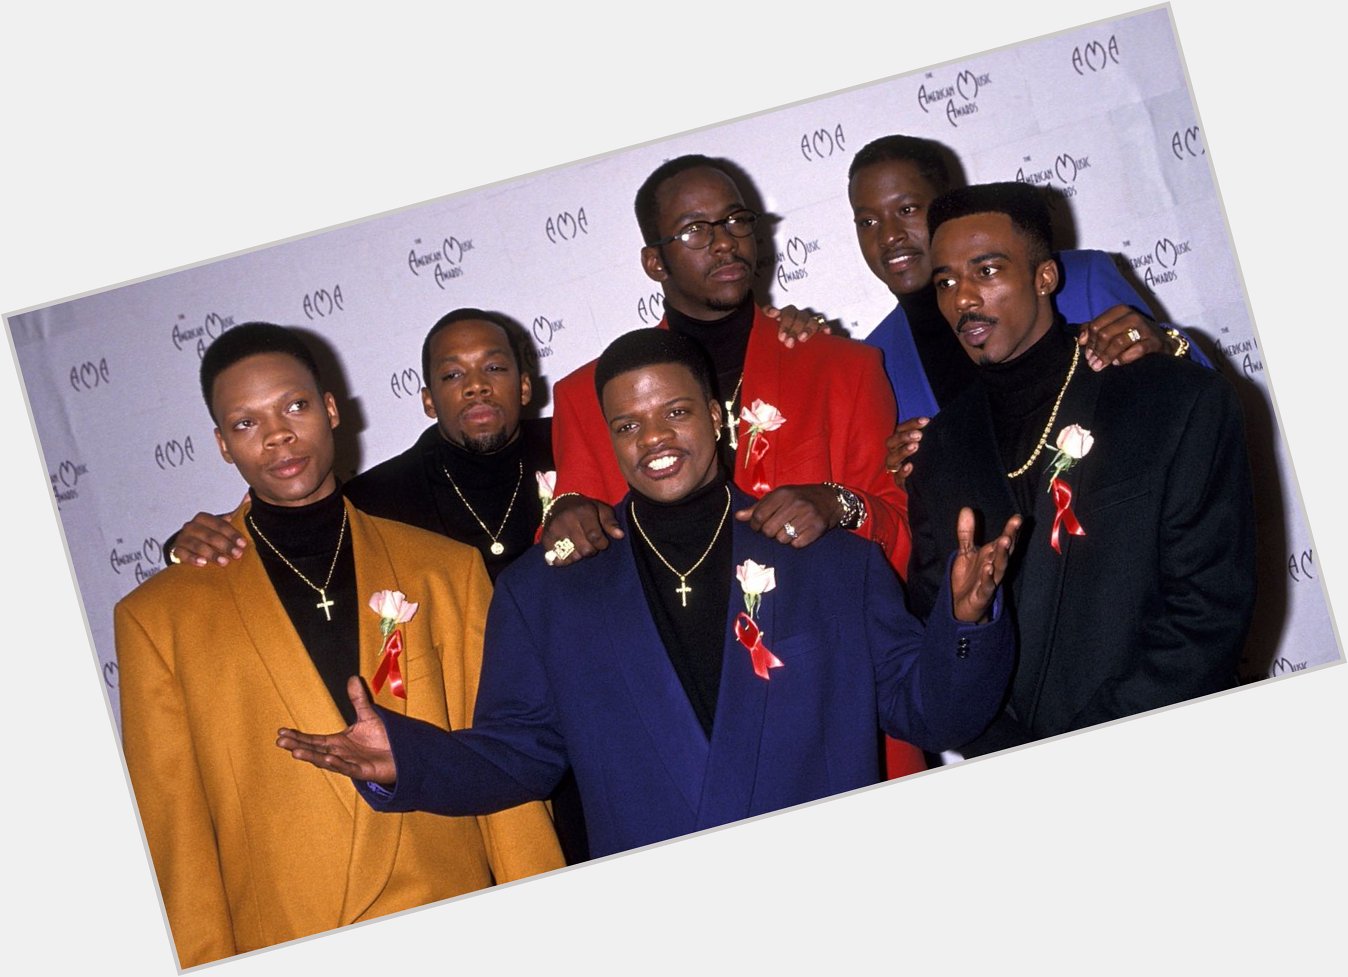 Happy Birthday to Michael Bivins(back row, far left), who turns 49 today! 